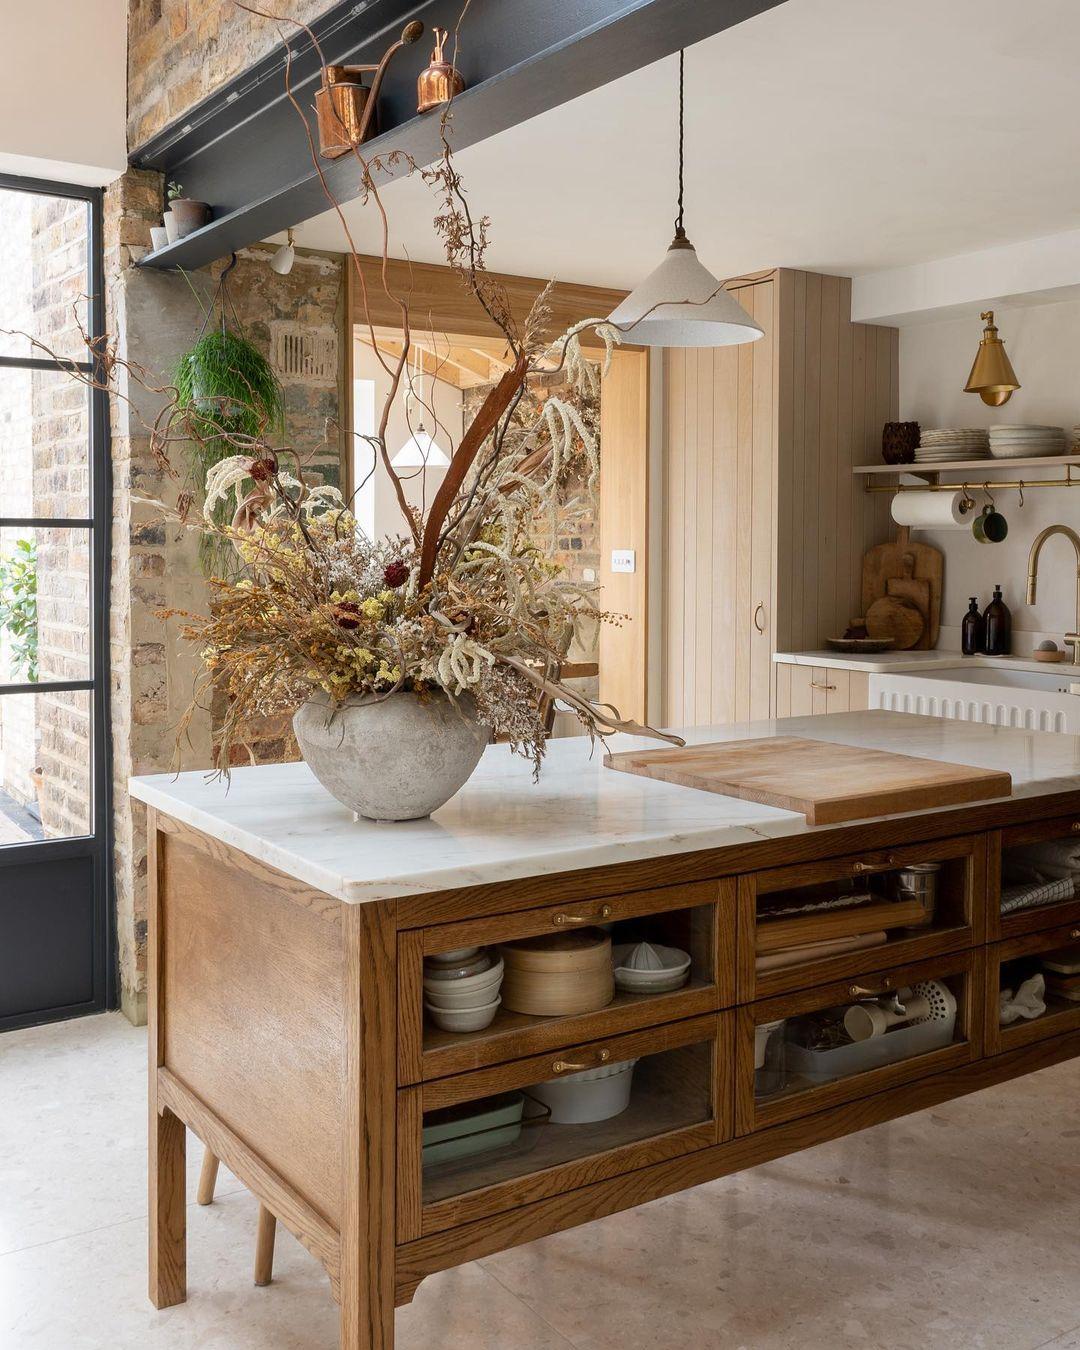 How to Create an Instagram-Worthy Kitchen - impressive natural elements